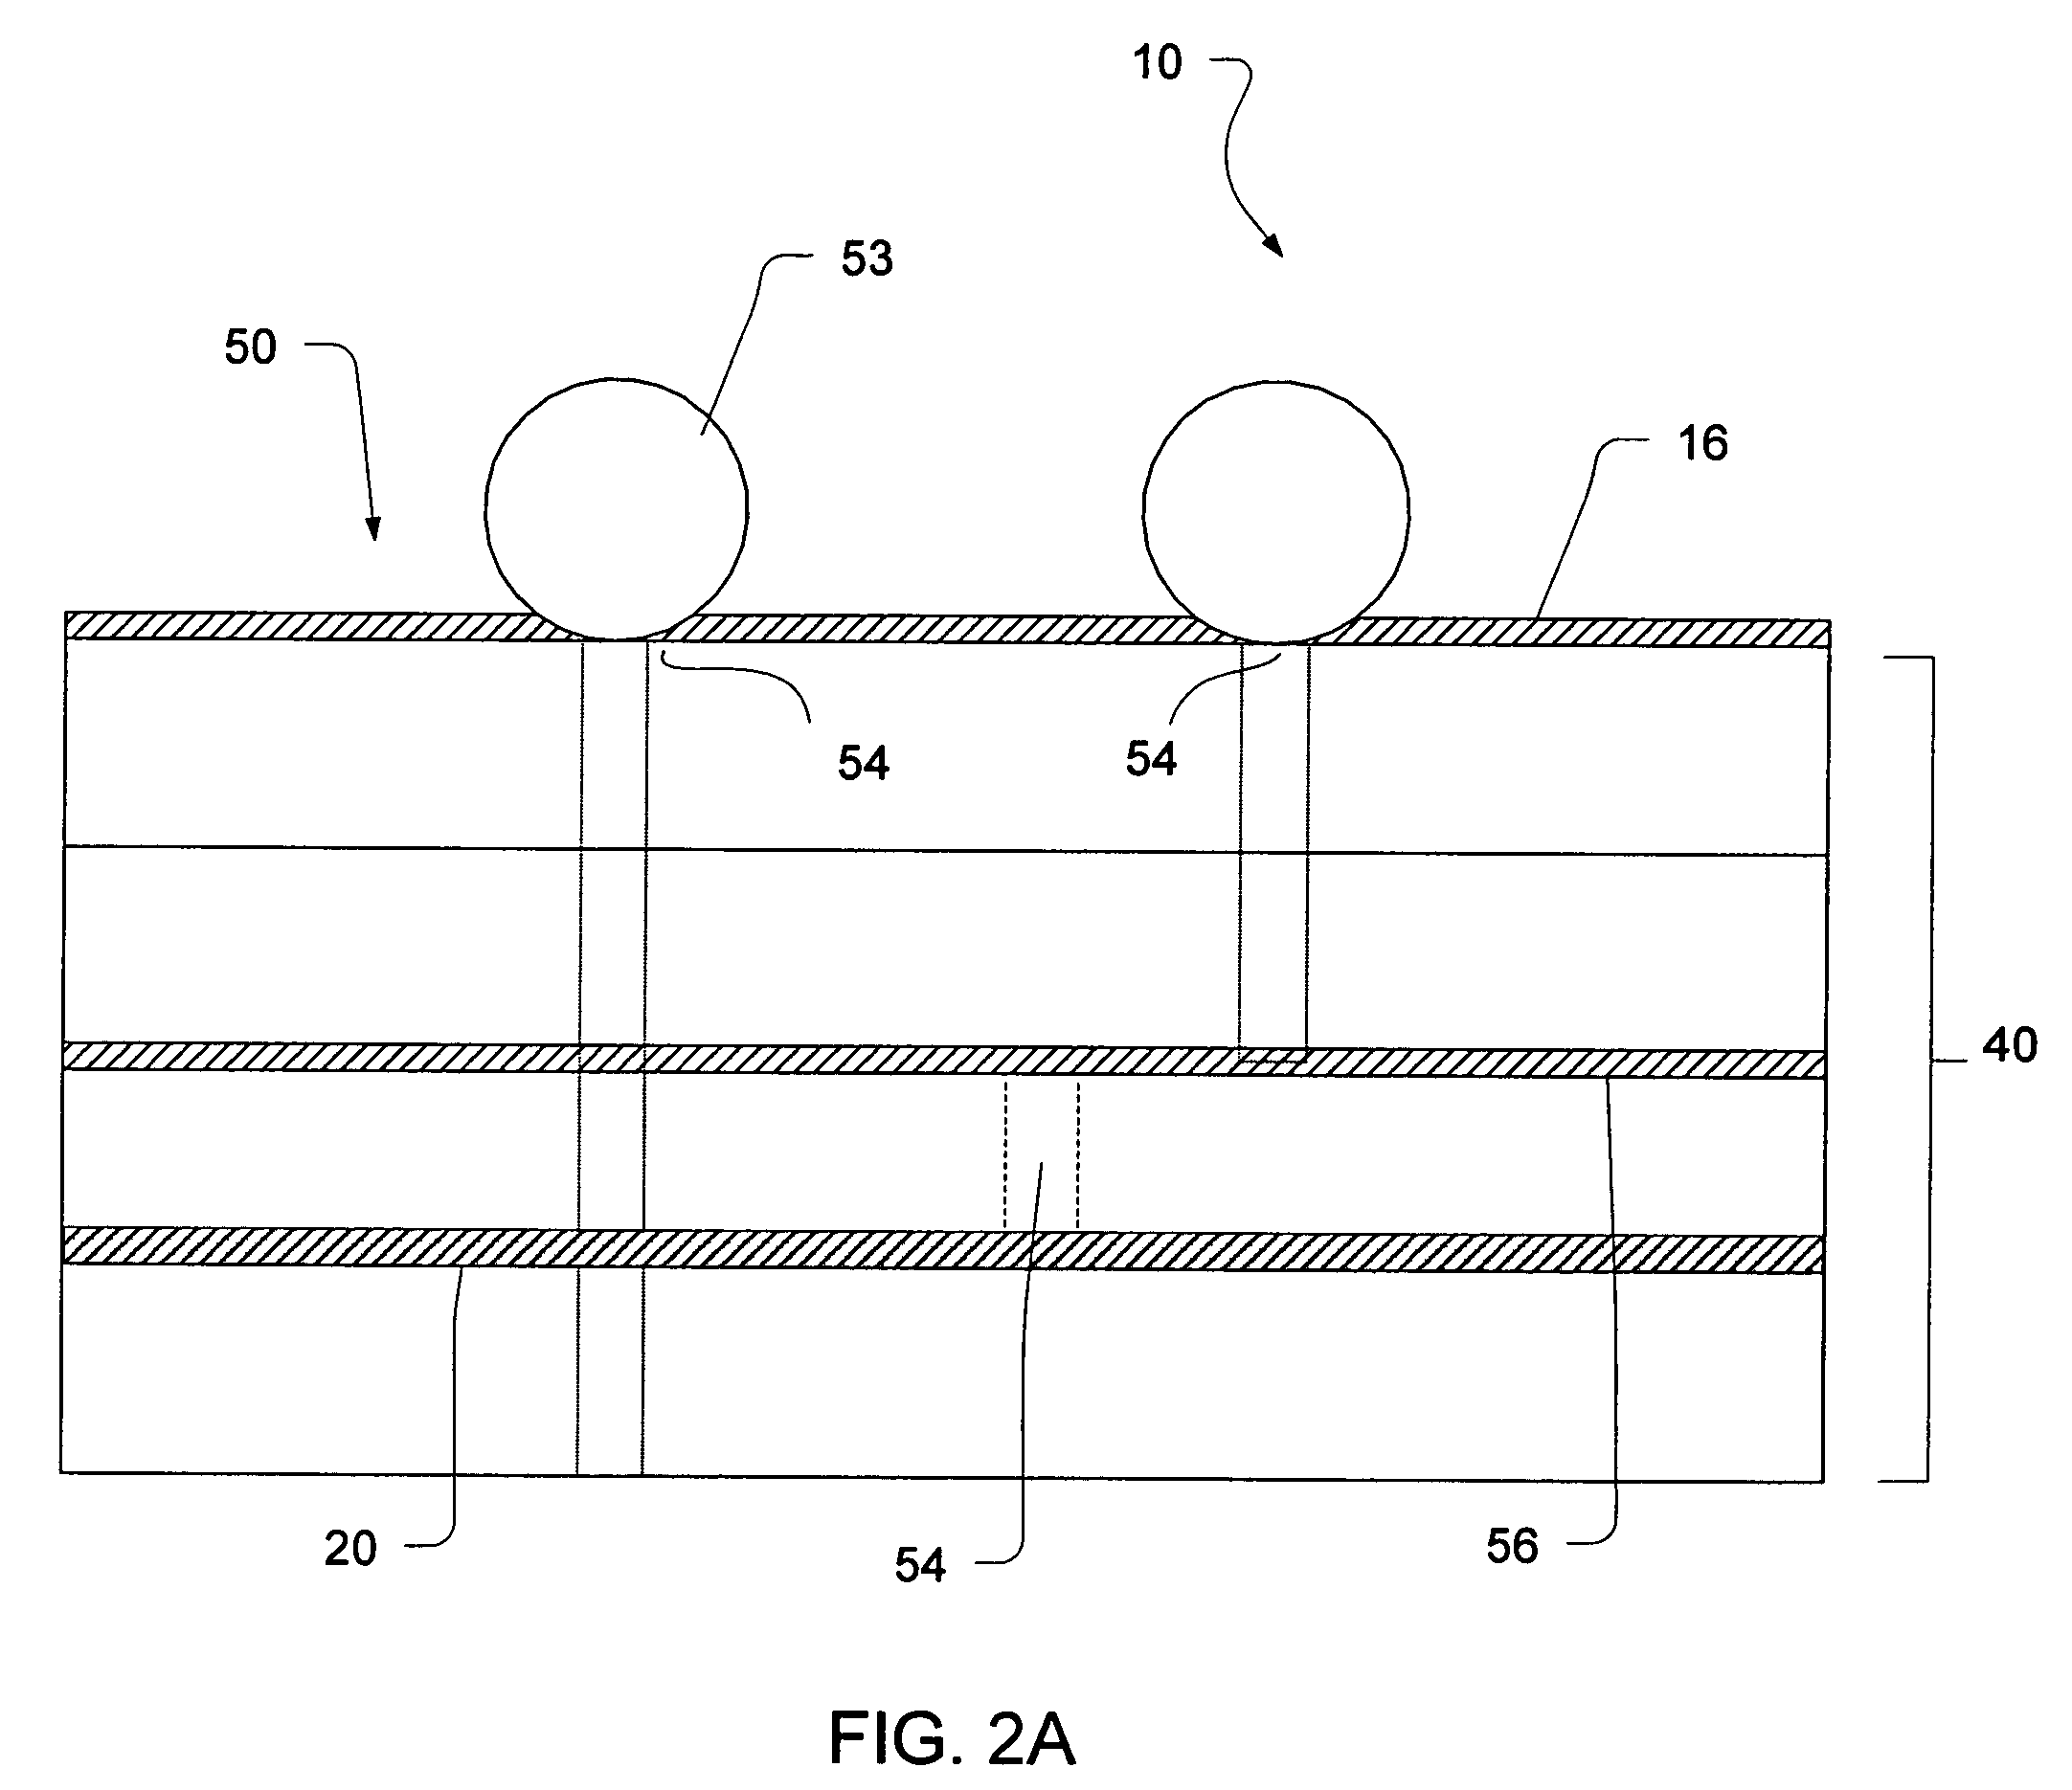 Electromagnetic interference shielding for a printed circuit board